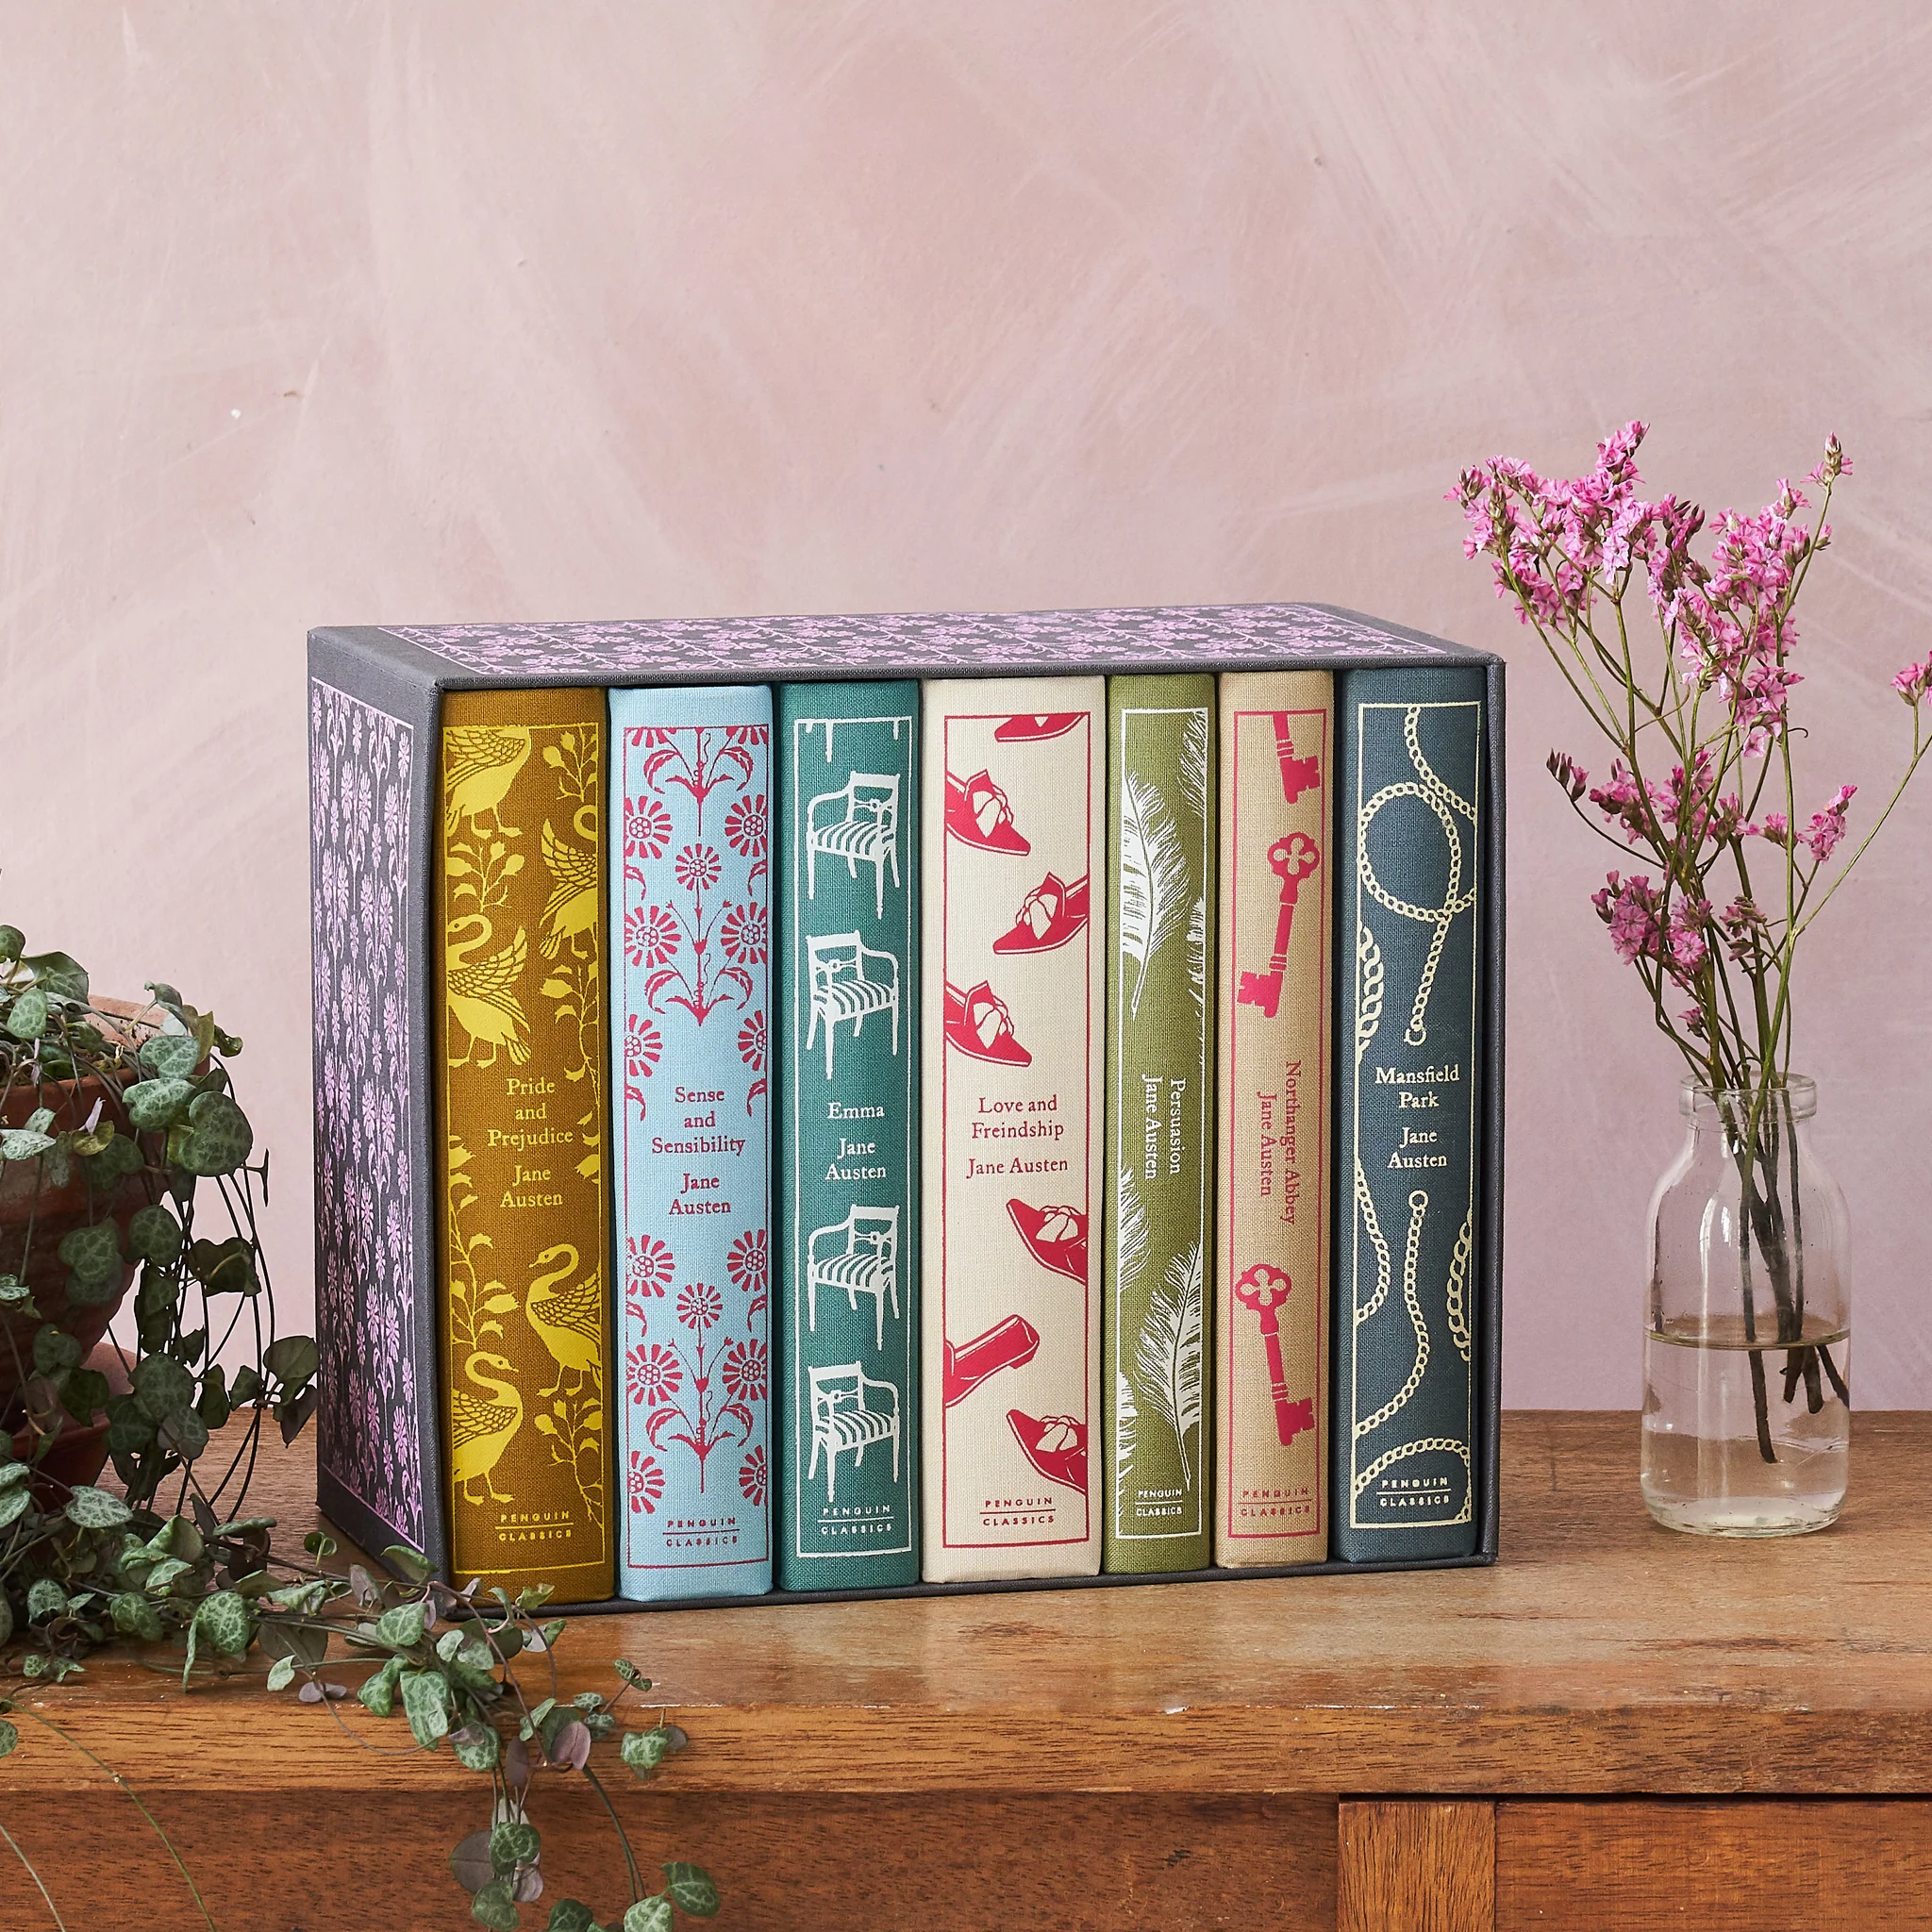 7 clothbound books sit on a wooden table next to flowers.